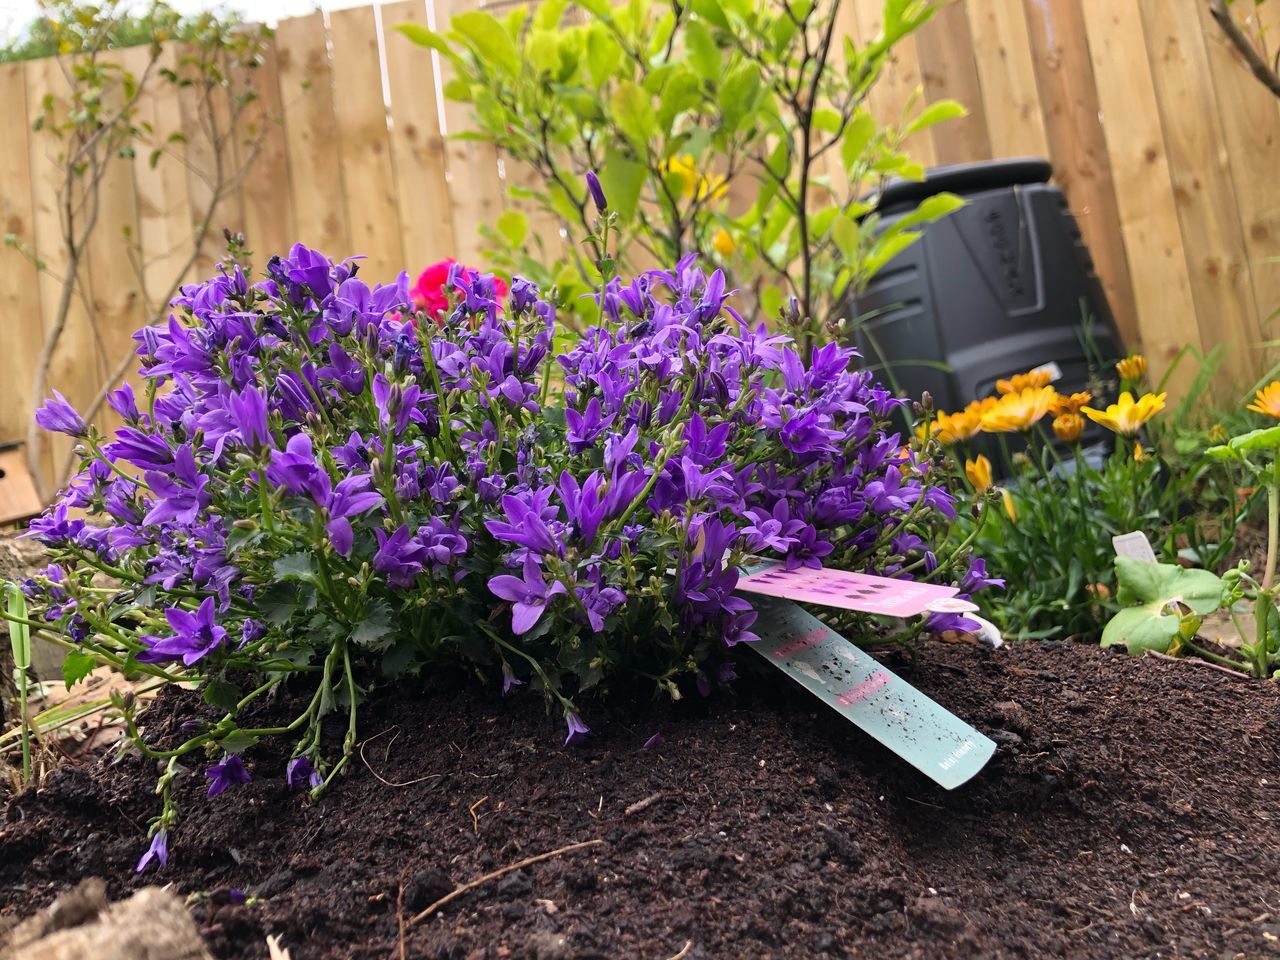 flowering plant, flower, plant, growth, vulnerability, freshness, purple, nature, fragility, beauty in nature, no people, day, front or back yard, close-up, focus on foreground, potted plant, plant part, outdoors, petal, dirt, springtime, gardening, flower pot, flowerbed